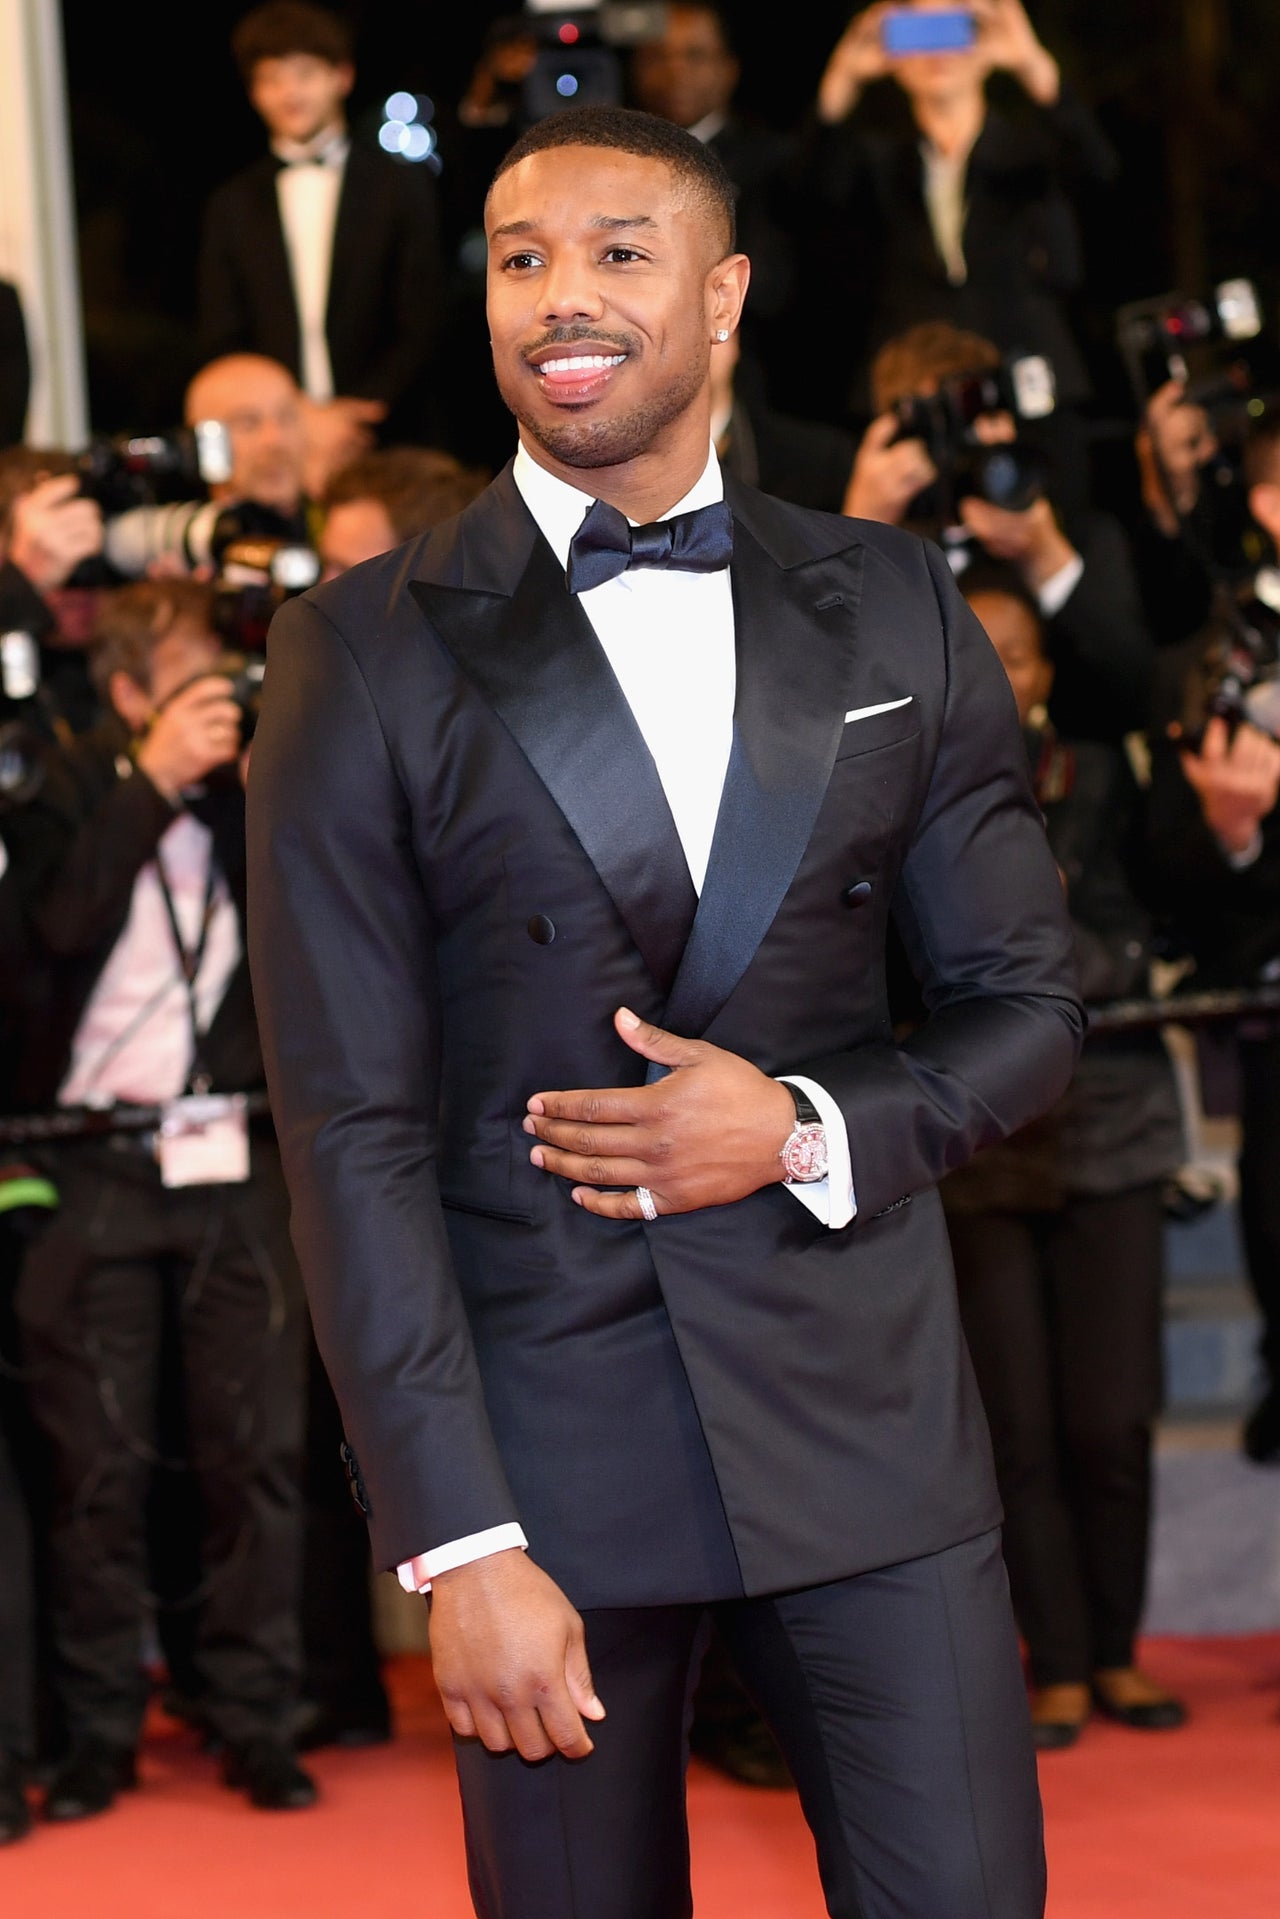 Now we know why Michael B. Jordan is hot AF after the 'Black